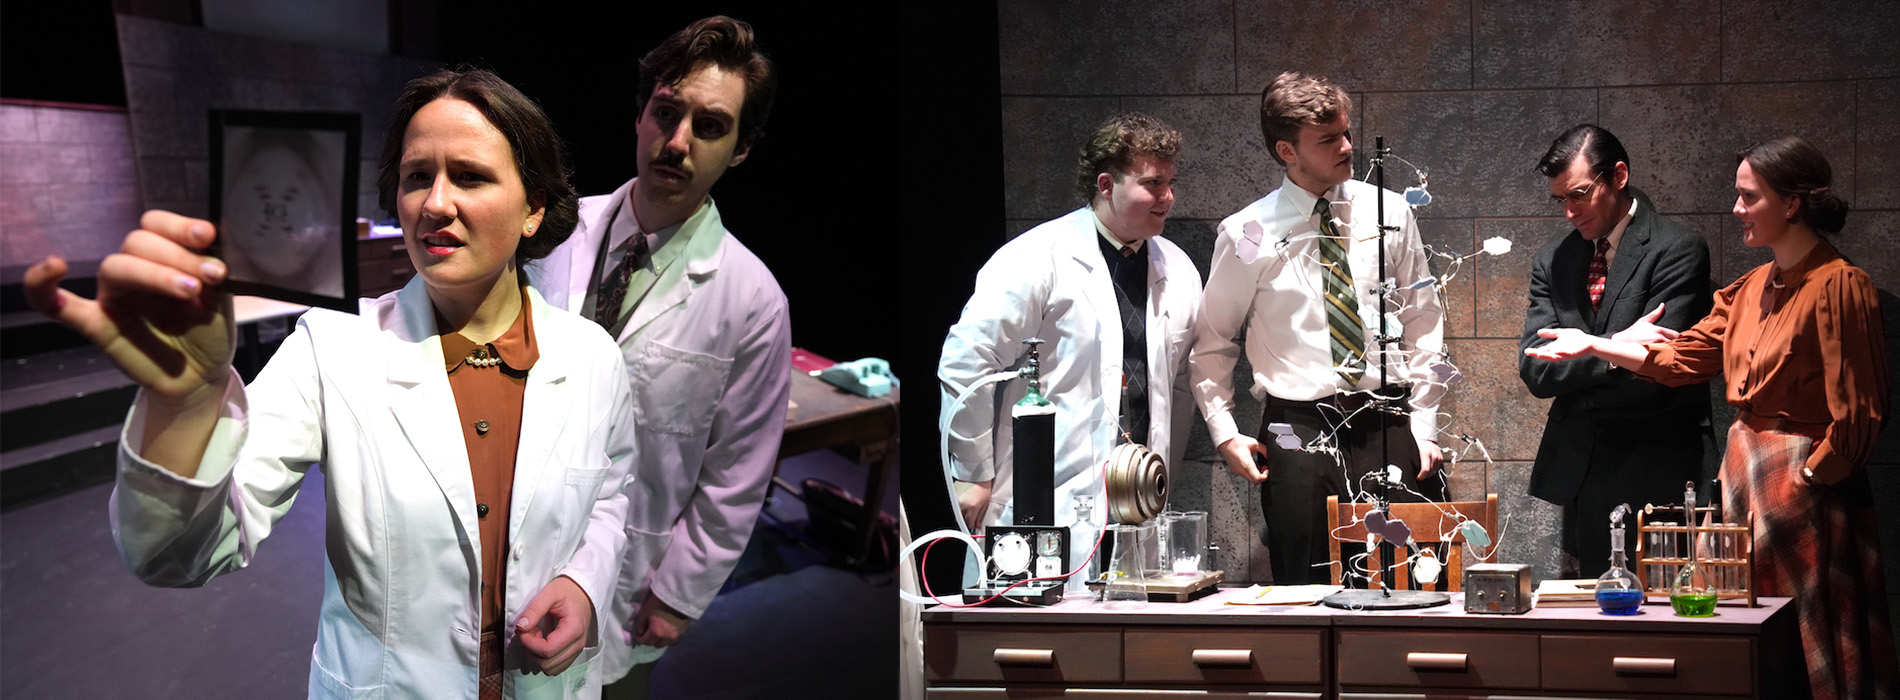 Two photographs from DMTC’s production of Photograph 51 are combined into one image. On the left, an actress holds an image in her hand while she and an actor look at it. On the right, four actors gather behind a table filled with science materials as they have a discussion.